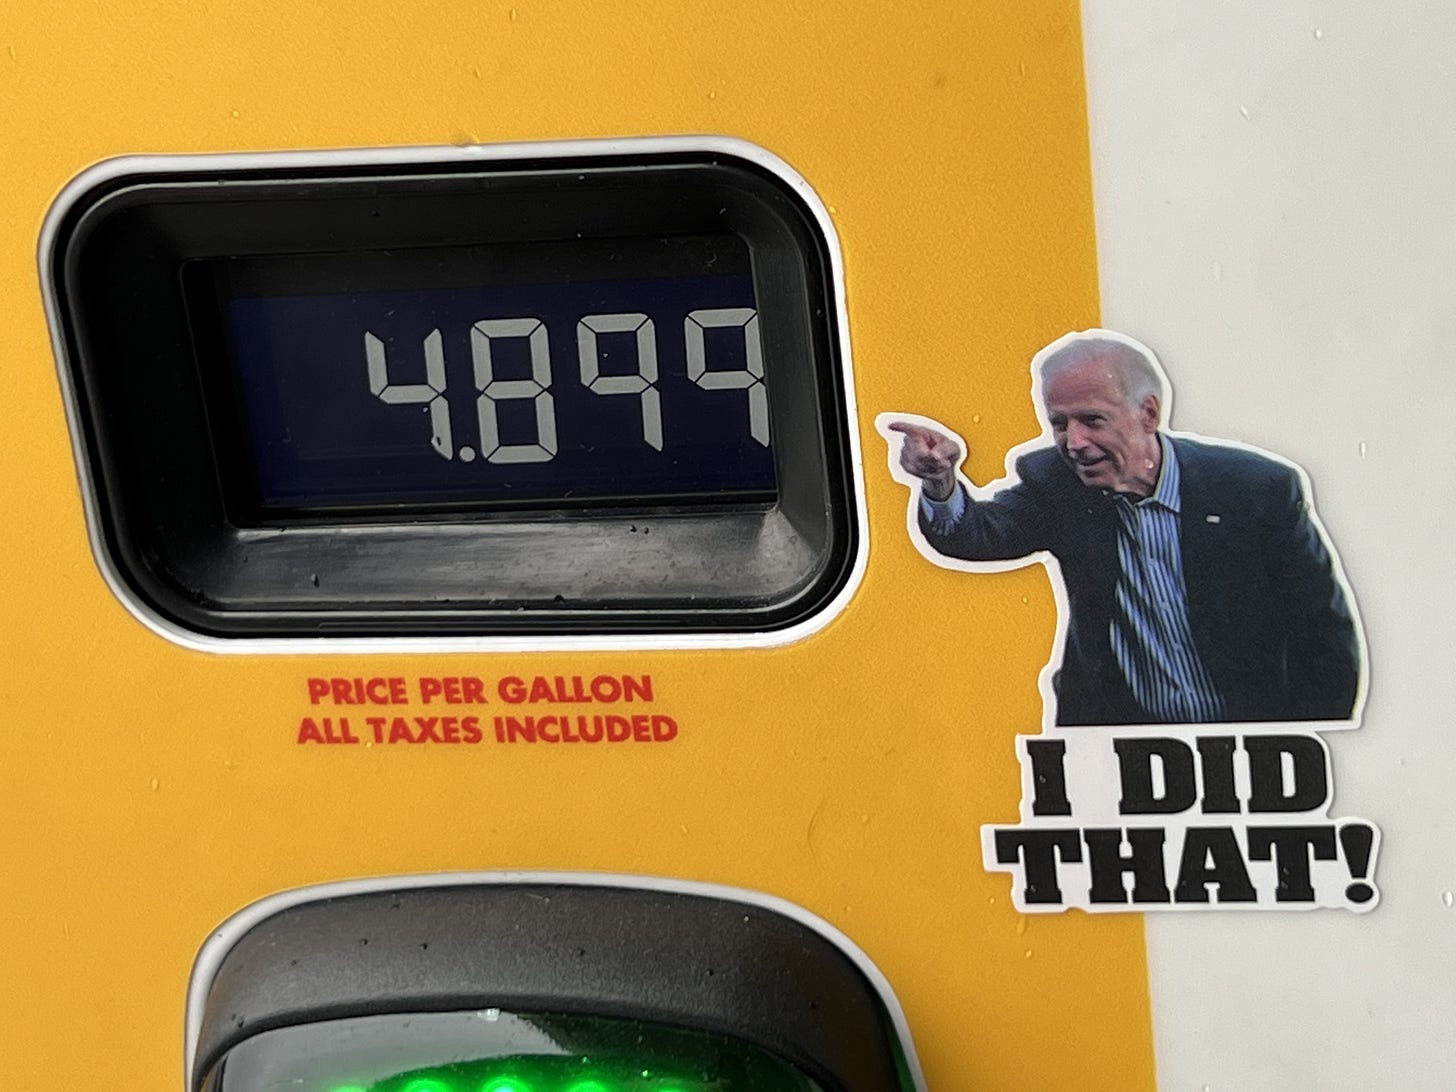 A satirical protest sticker critical of American President Joe Biden, with text reading I Did That, has been placed on a gasoline pump in Lafayette, California, likely to imply responsibility for high gasoline prices, December 29, 2021. (Photo by Smith Collection/Gado/Getty Images)